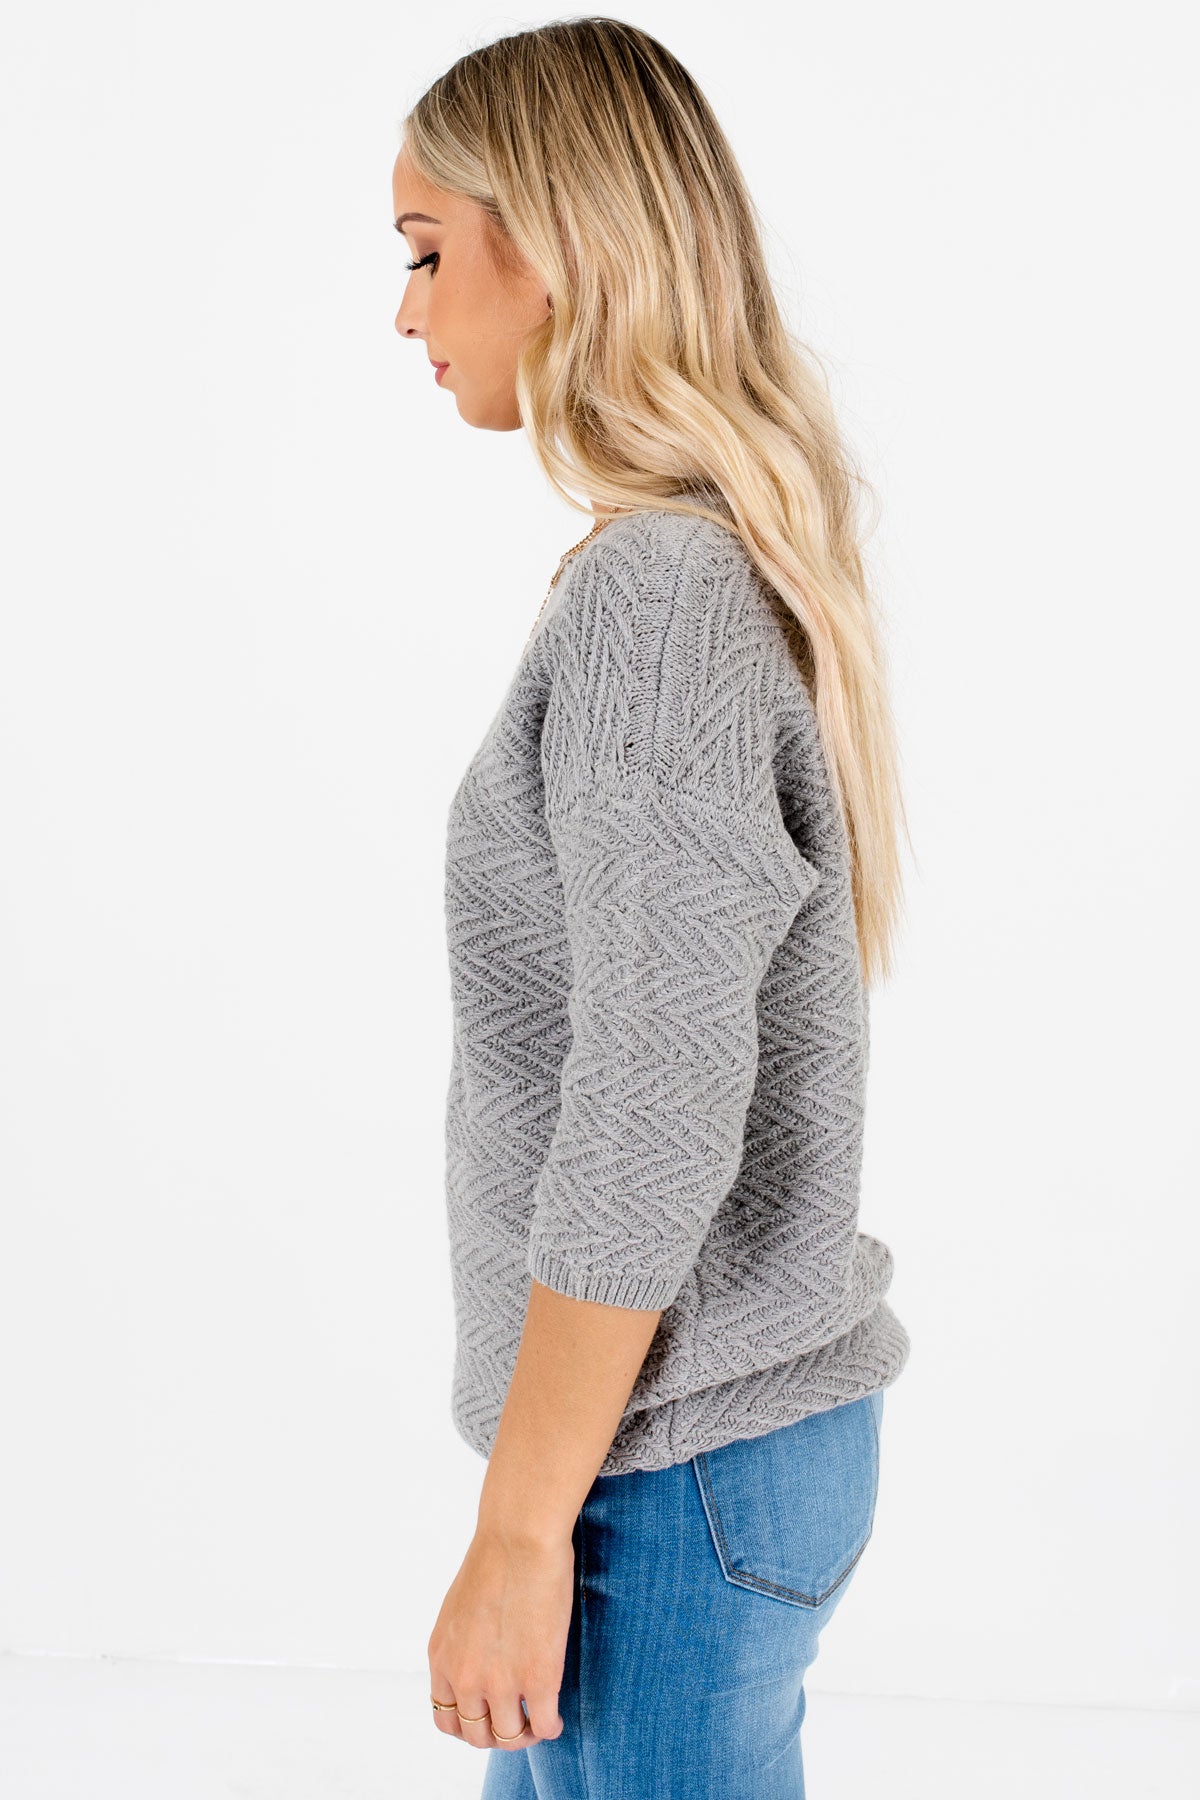 Gray Warm and Cozy Boutique Sweaters for Women